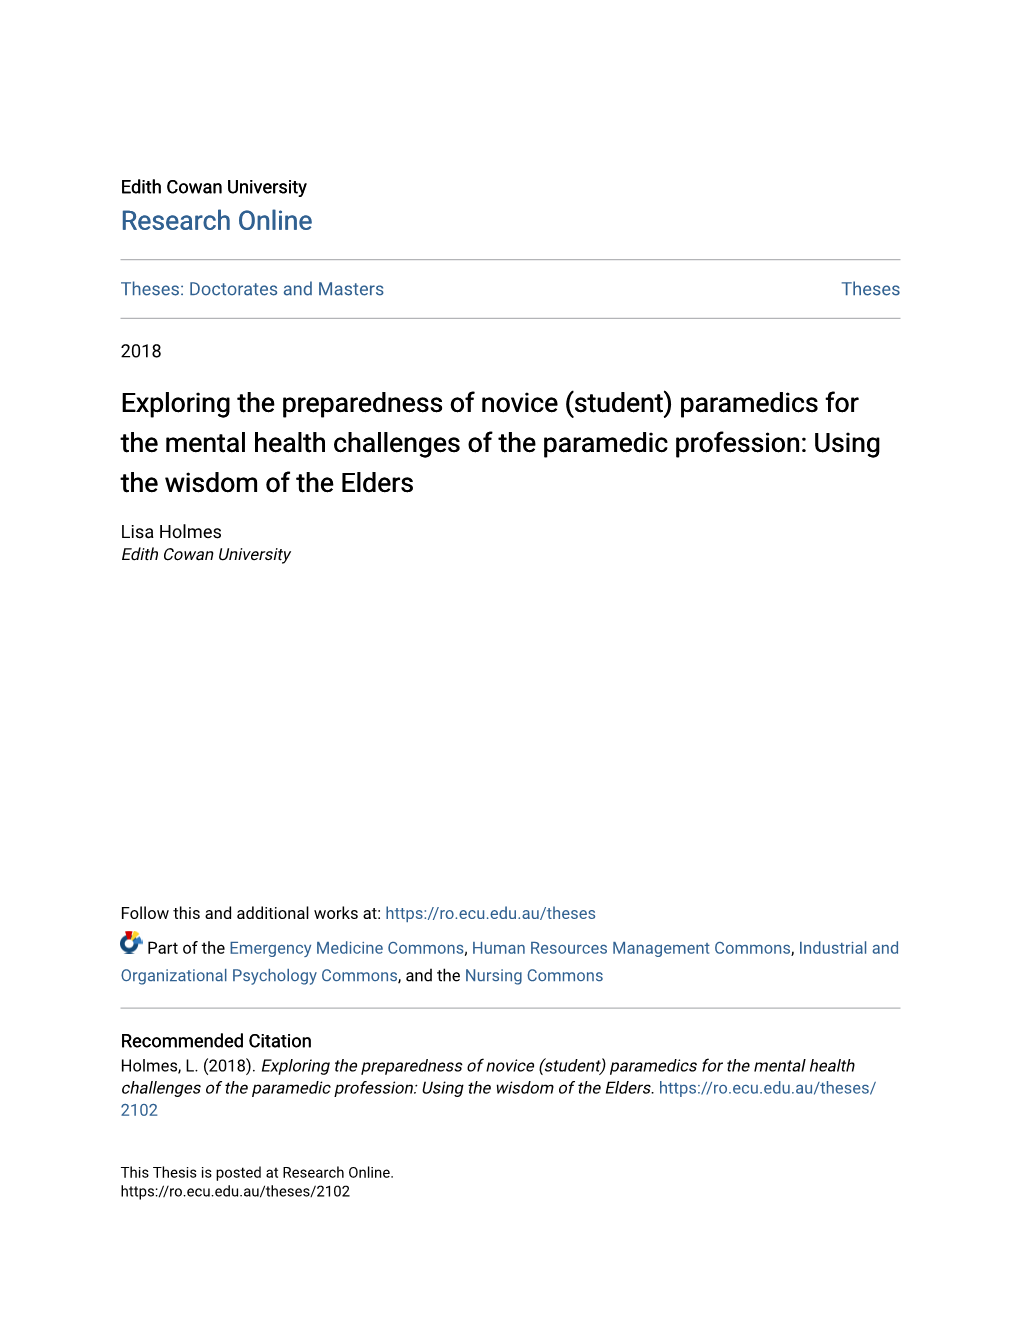 Exploring the Preparedness of Novice (Student) Paramedics for the Mental Health Challenges of the Paramedic Profession: Using the Wisdom of the Elders